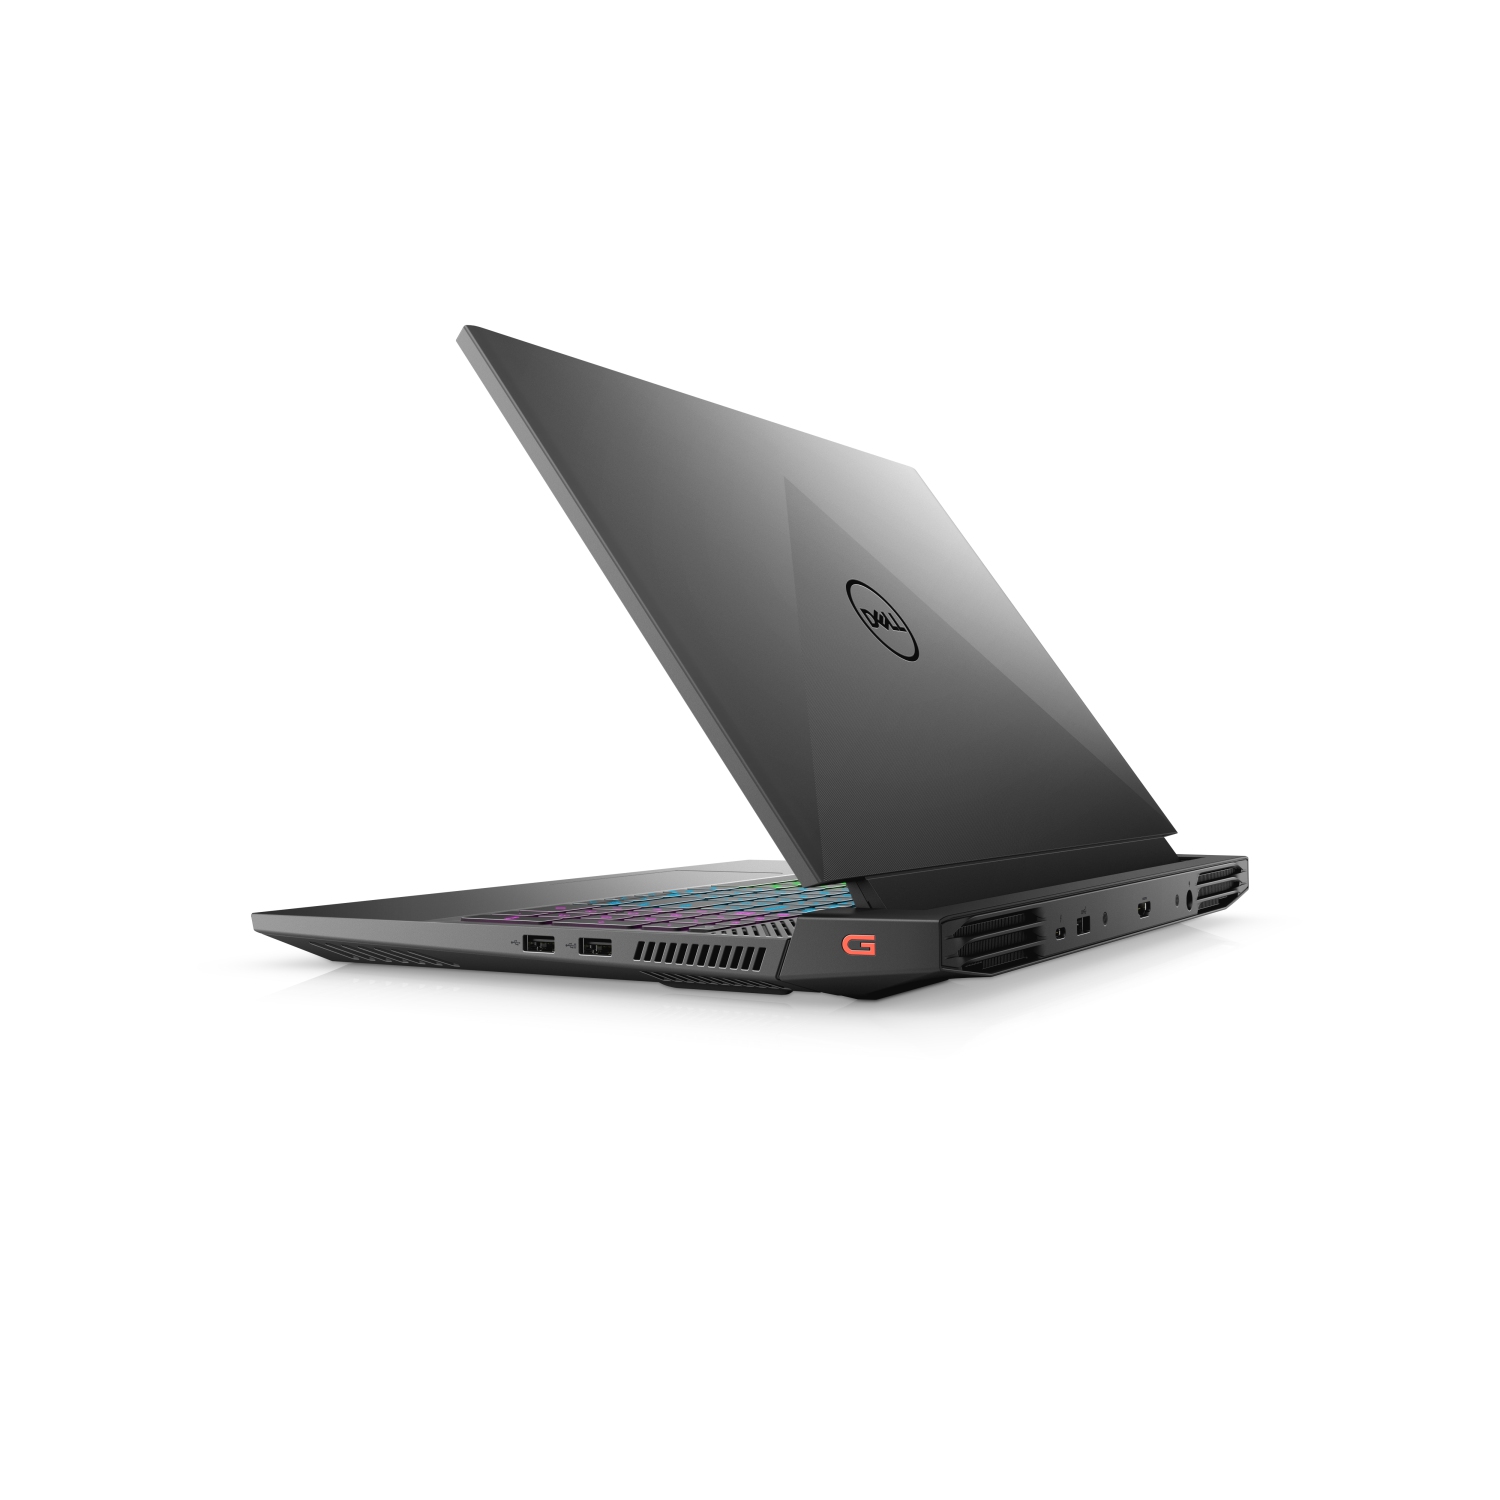 Refurbished (Excellent) - Dell G15 5511 Gaming Laptop (2021), 15.6" FHD, Core i7 - 1TB SSD - 16GB RAM - RTX 3060, 8 Cores @ 4.6 GHz - 11th Gen CPU Certified Refurbished